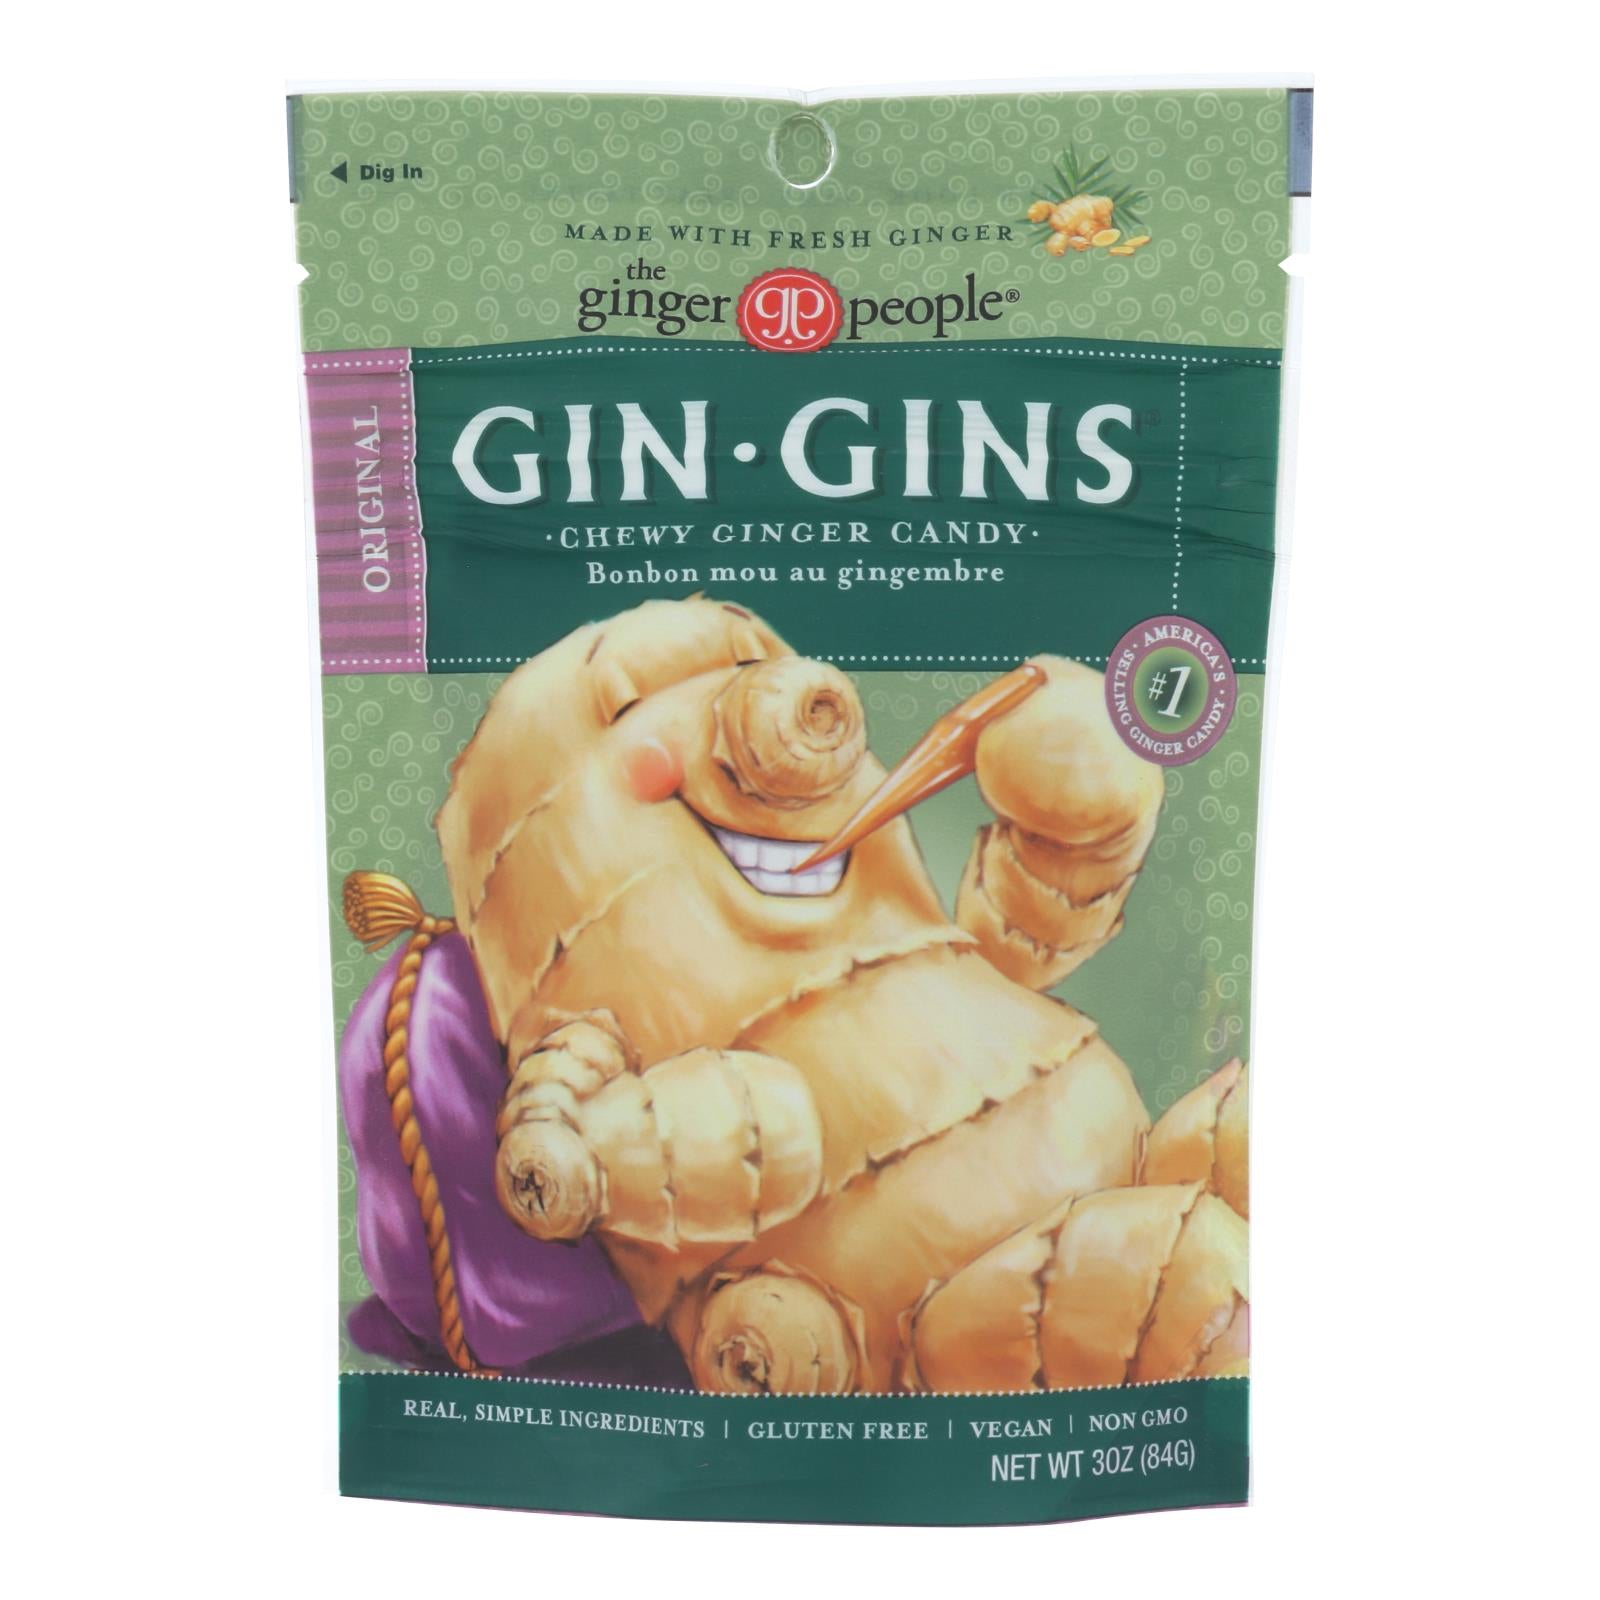 Ginger People - Gin Gins Chewy Ginger Candy - Original - Case Of 12 - 3 Oz.